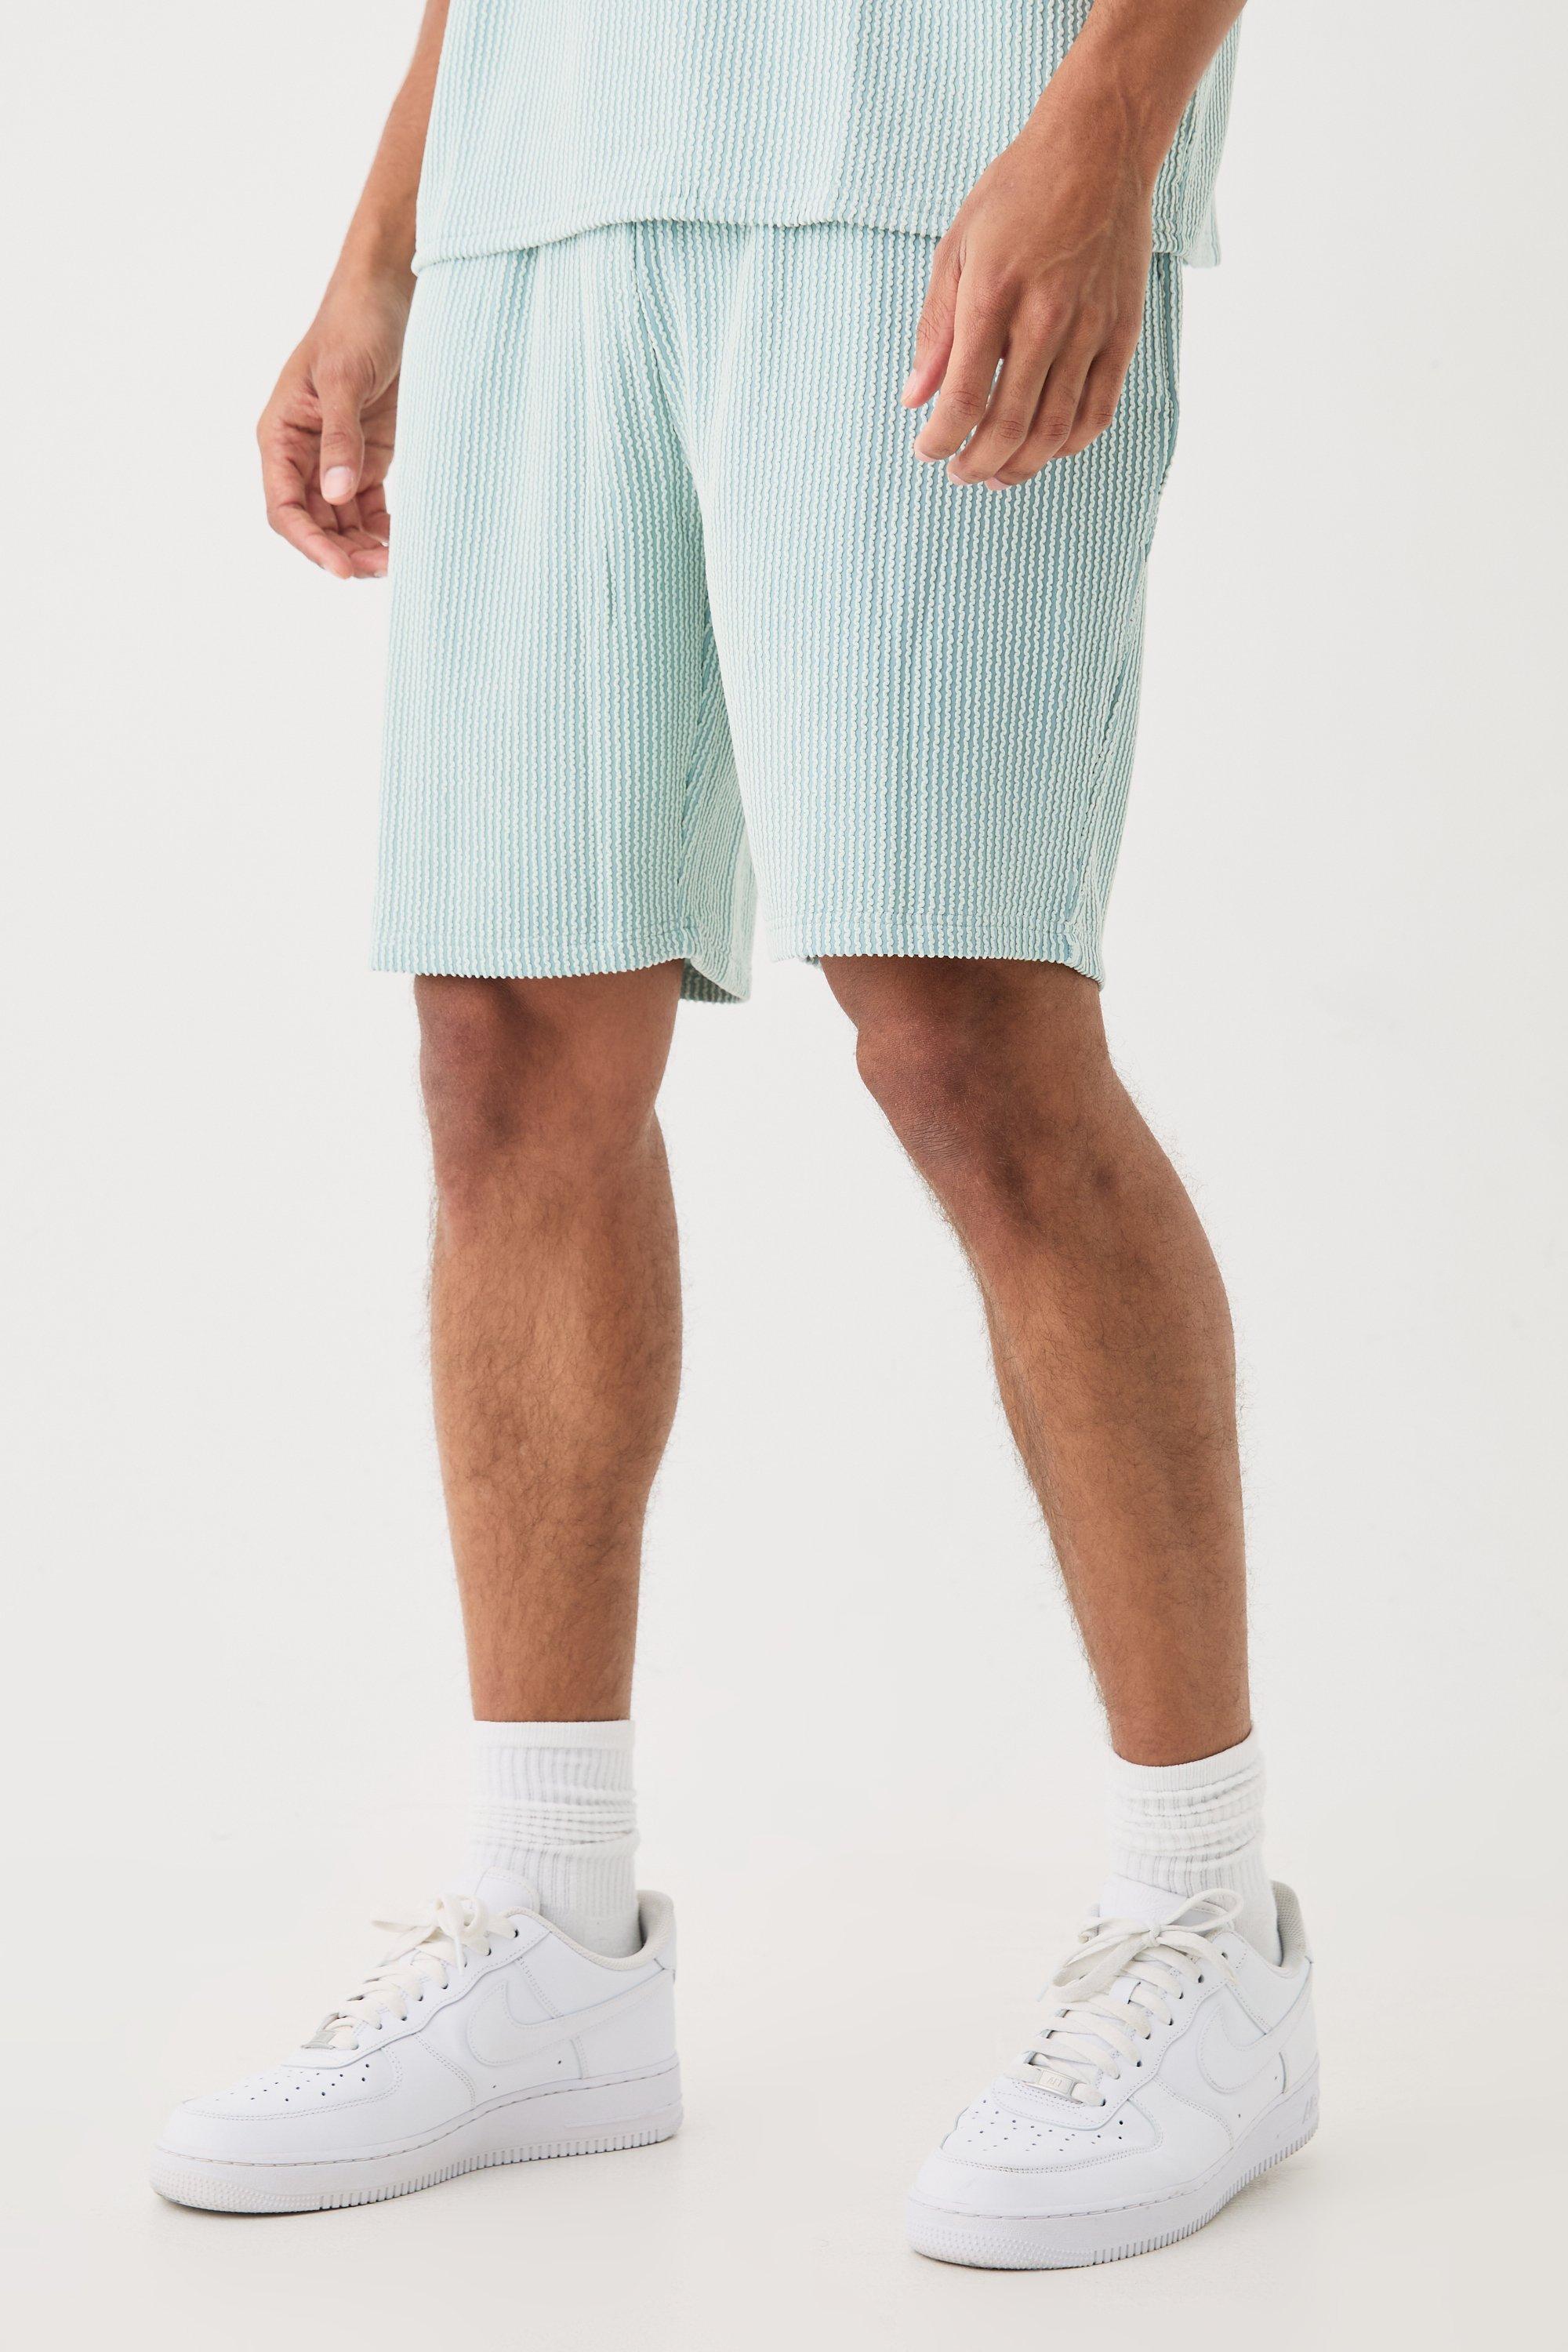 Image of Relaxed Fit Mid Length Stripe Texture Shorts, Azzurro